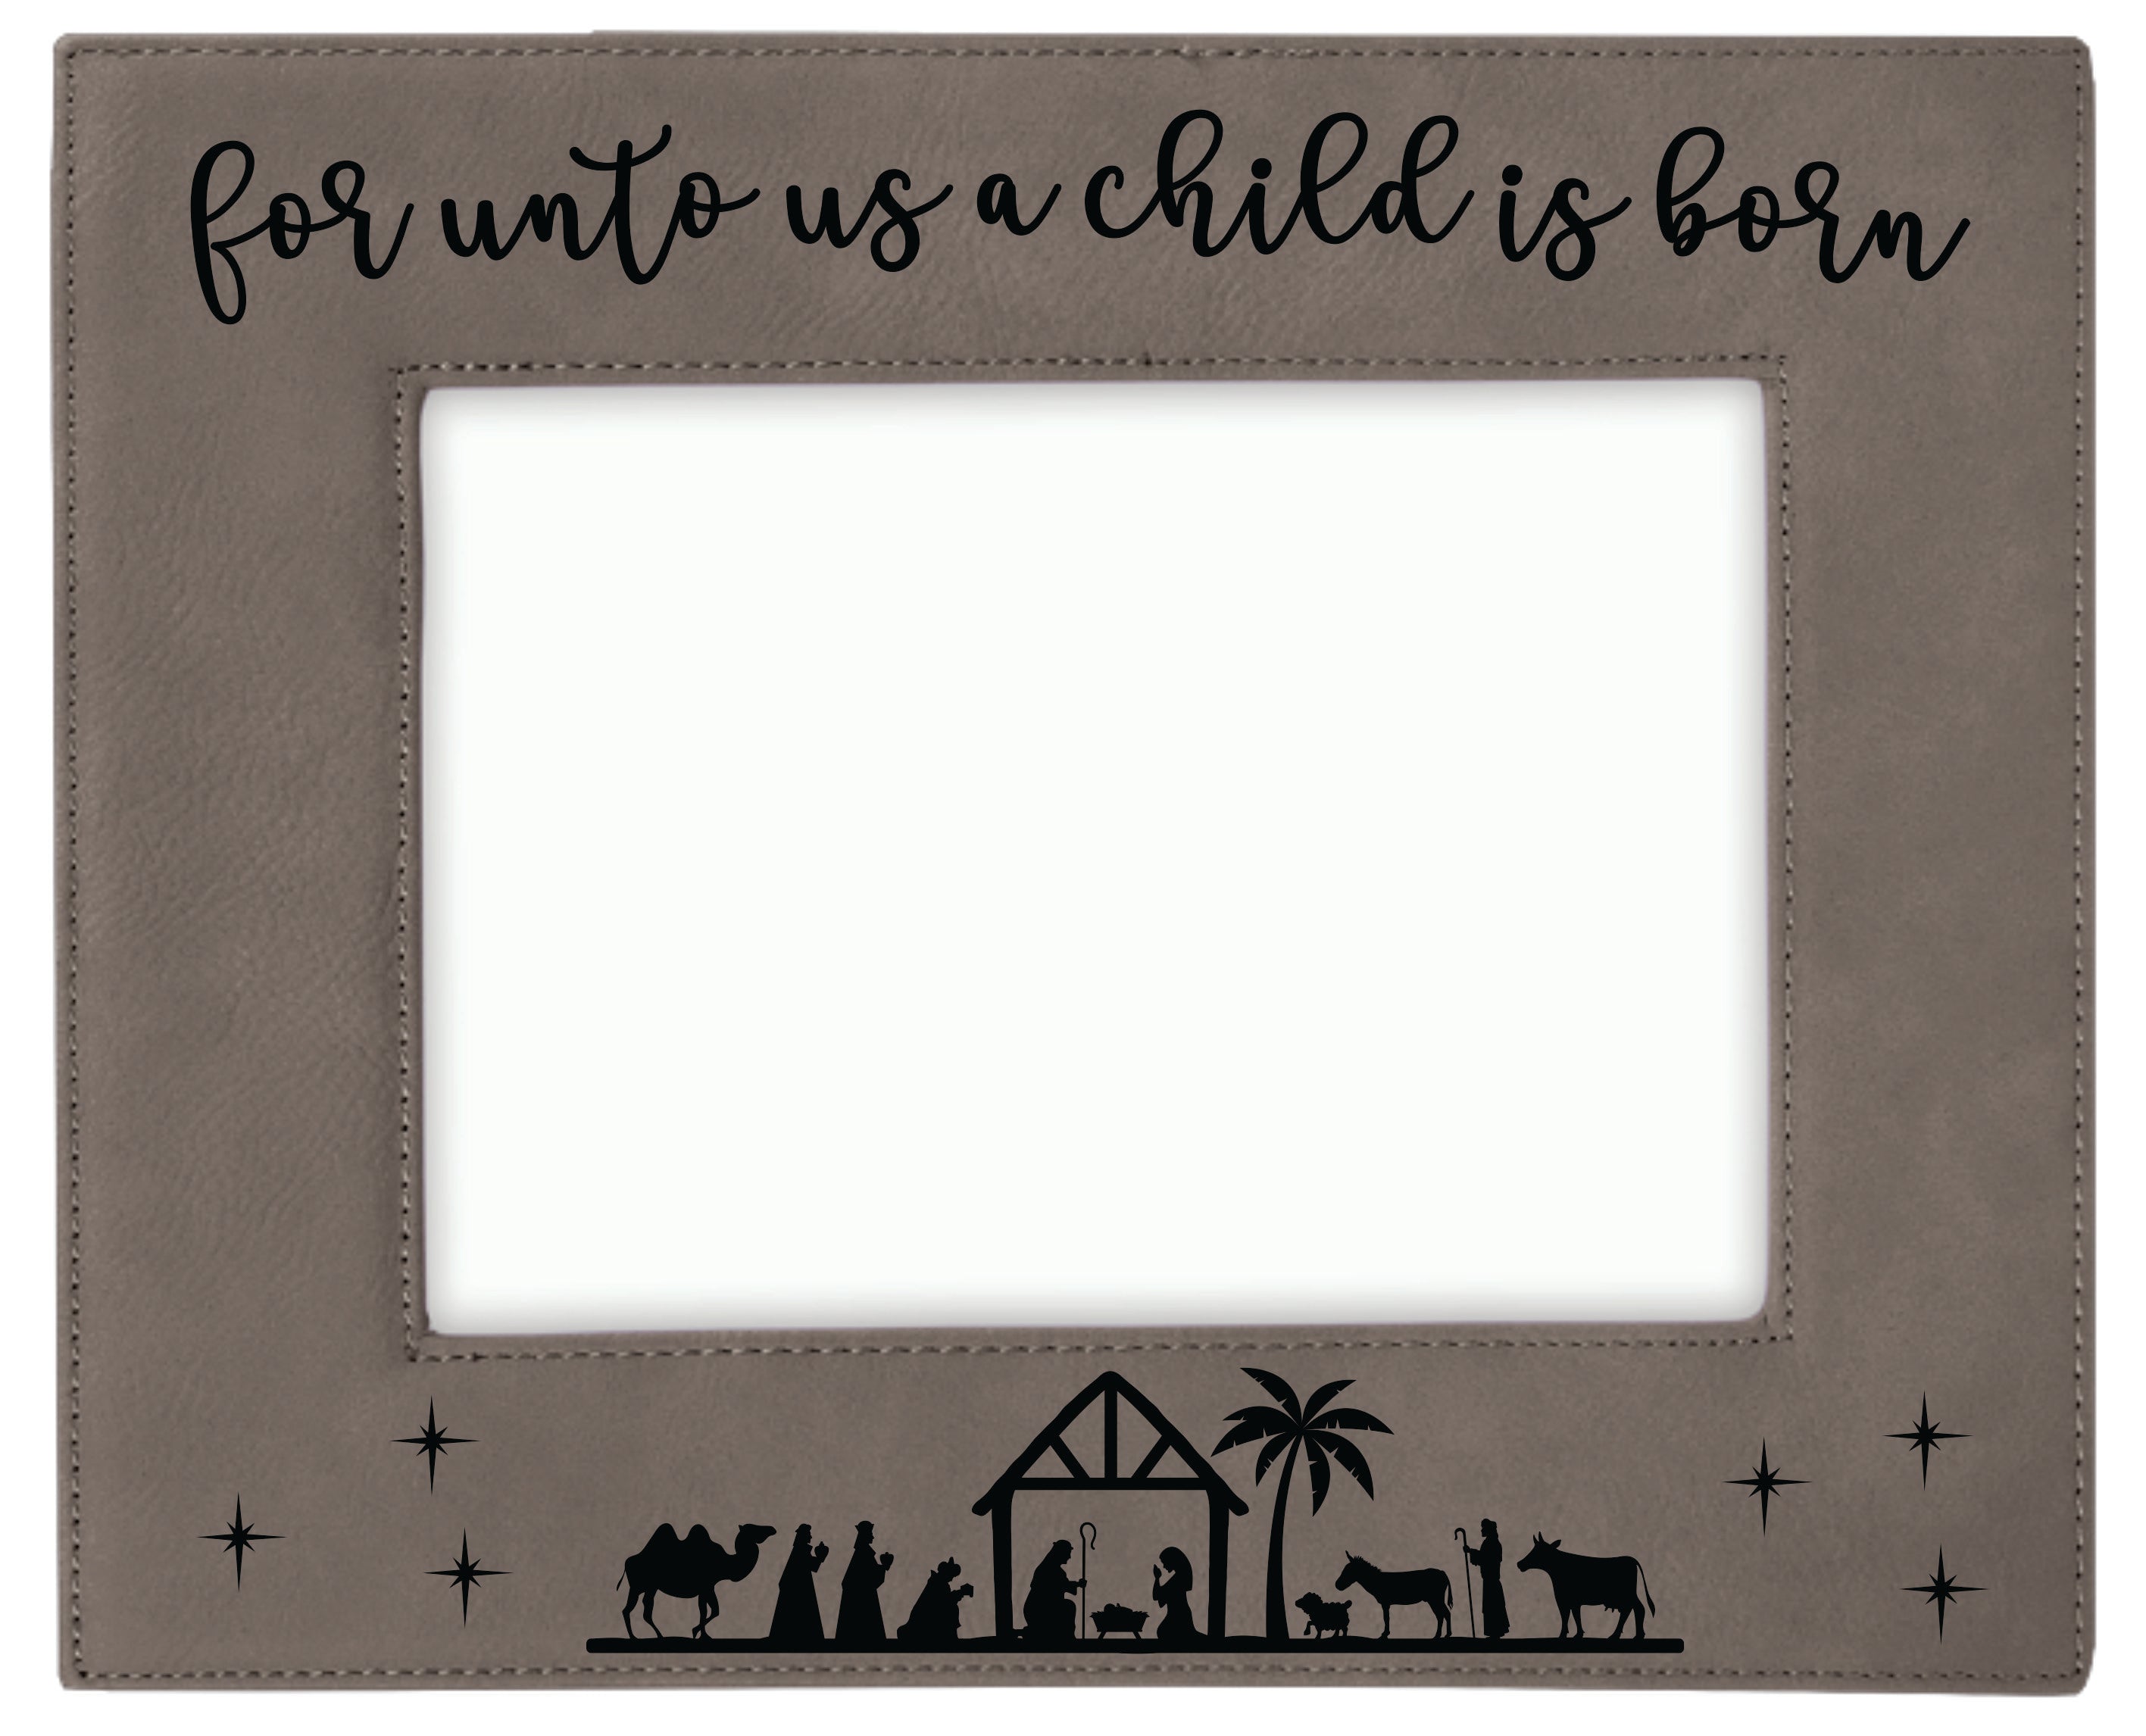 5" x 7" Gray Laserable Leatherette Photo Frame